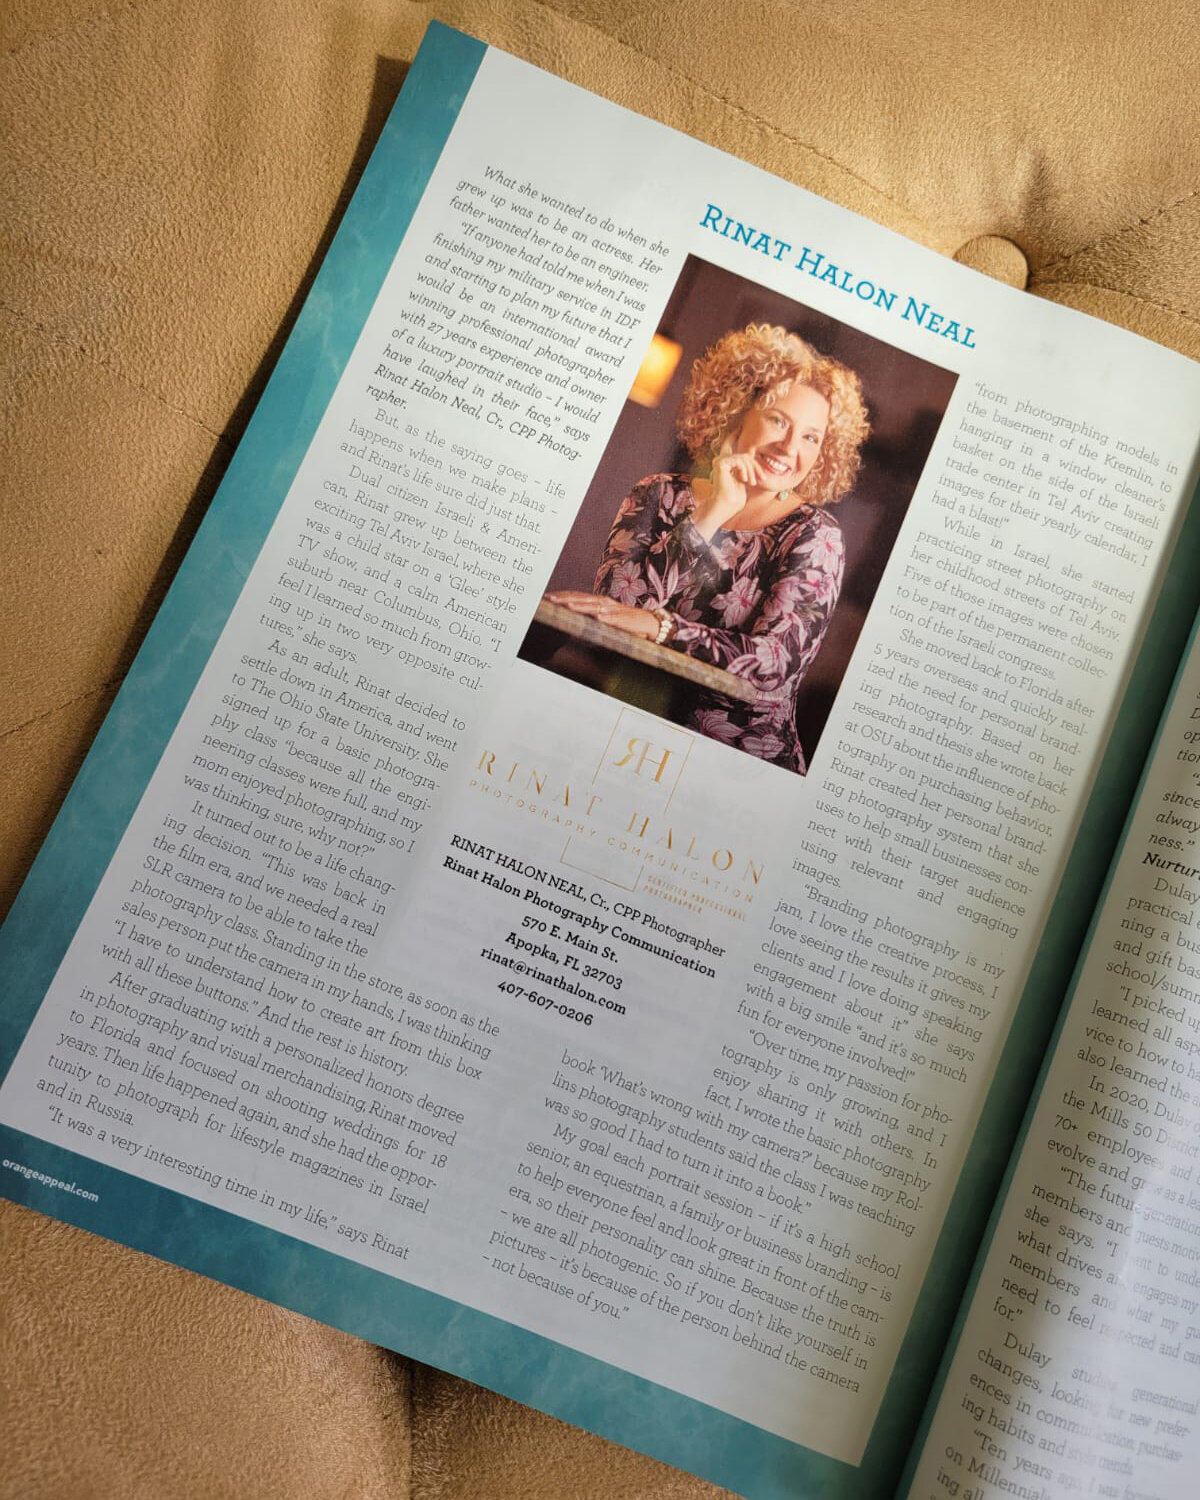 🌟 So thrilled to share some exciting news with all of you! 🌟

Guess who got featured in Orange Appeal magazine among some seriously fabulous leading business women? That's right - yours truly! 📸💼✨

I had an absolute blast chatting about my 27 yea